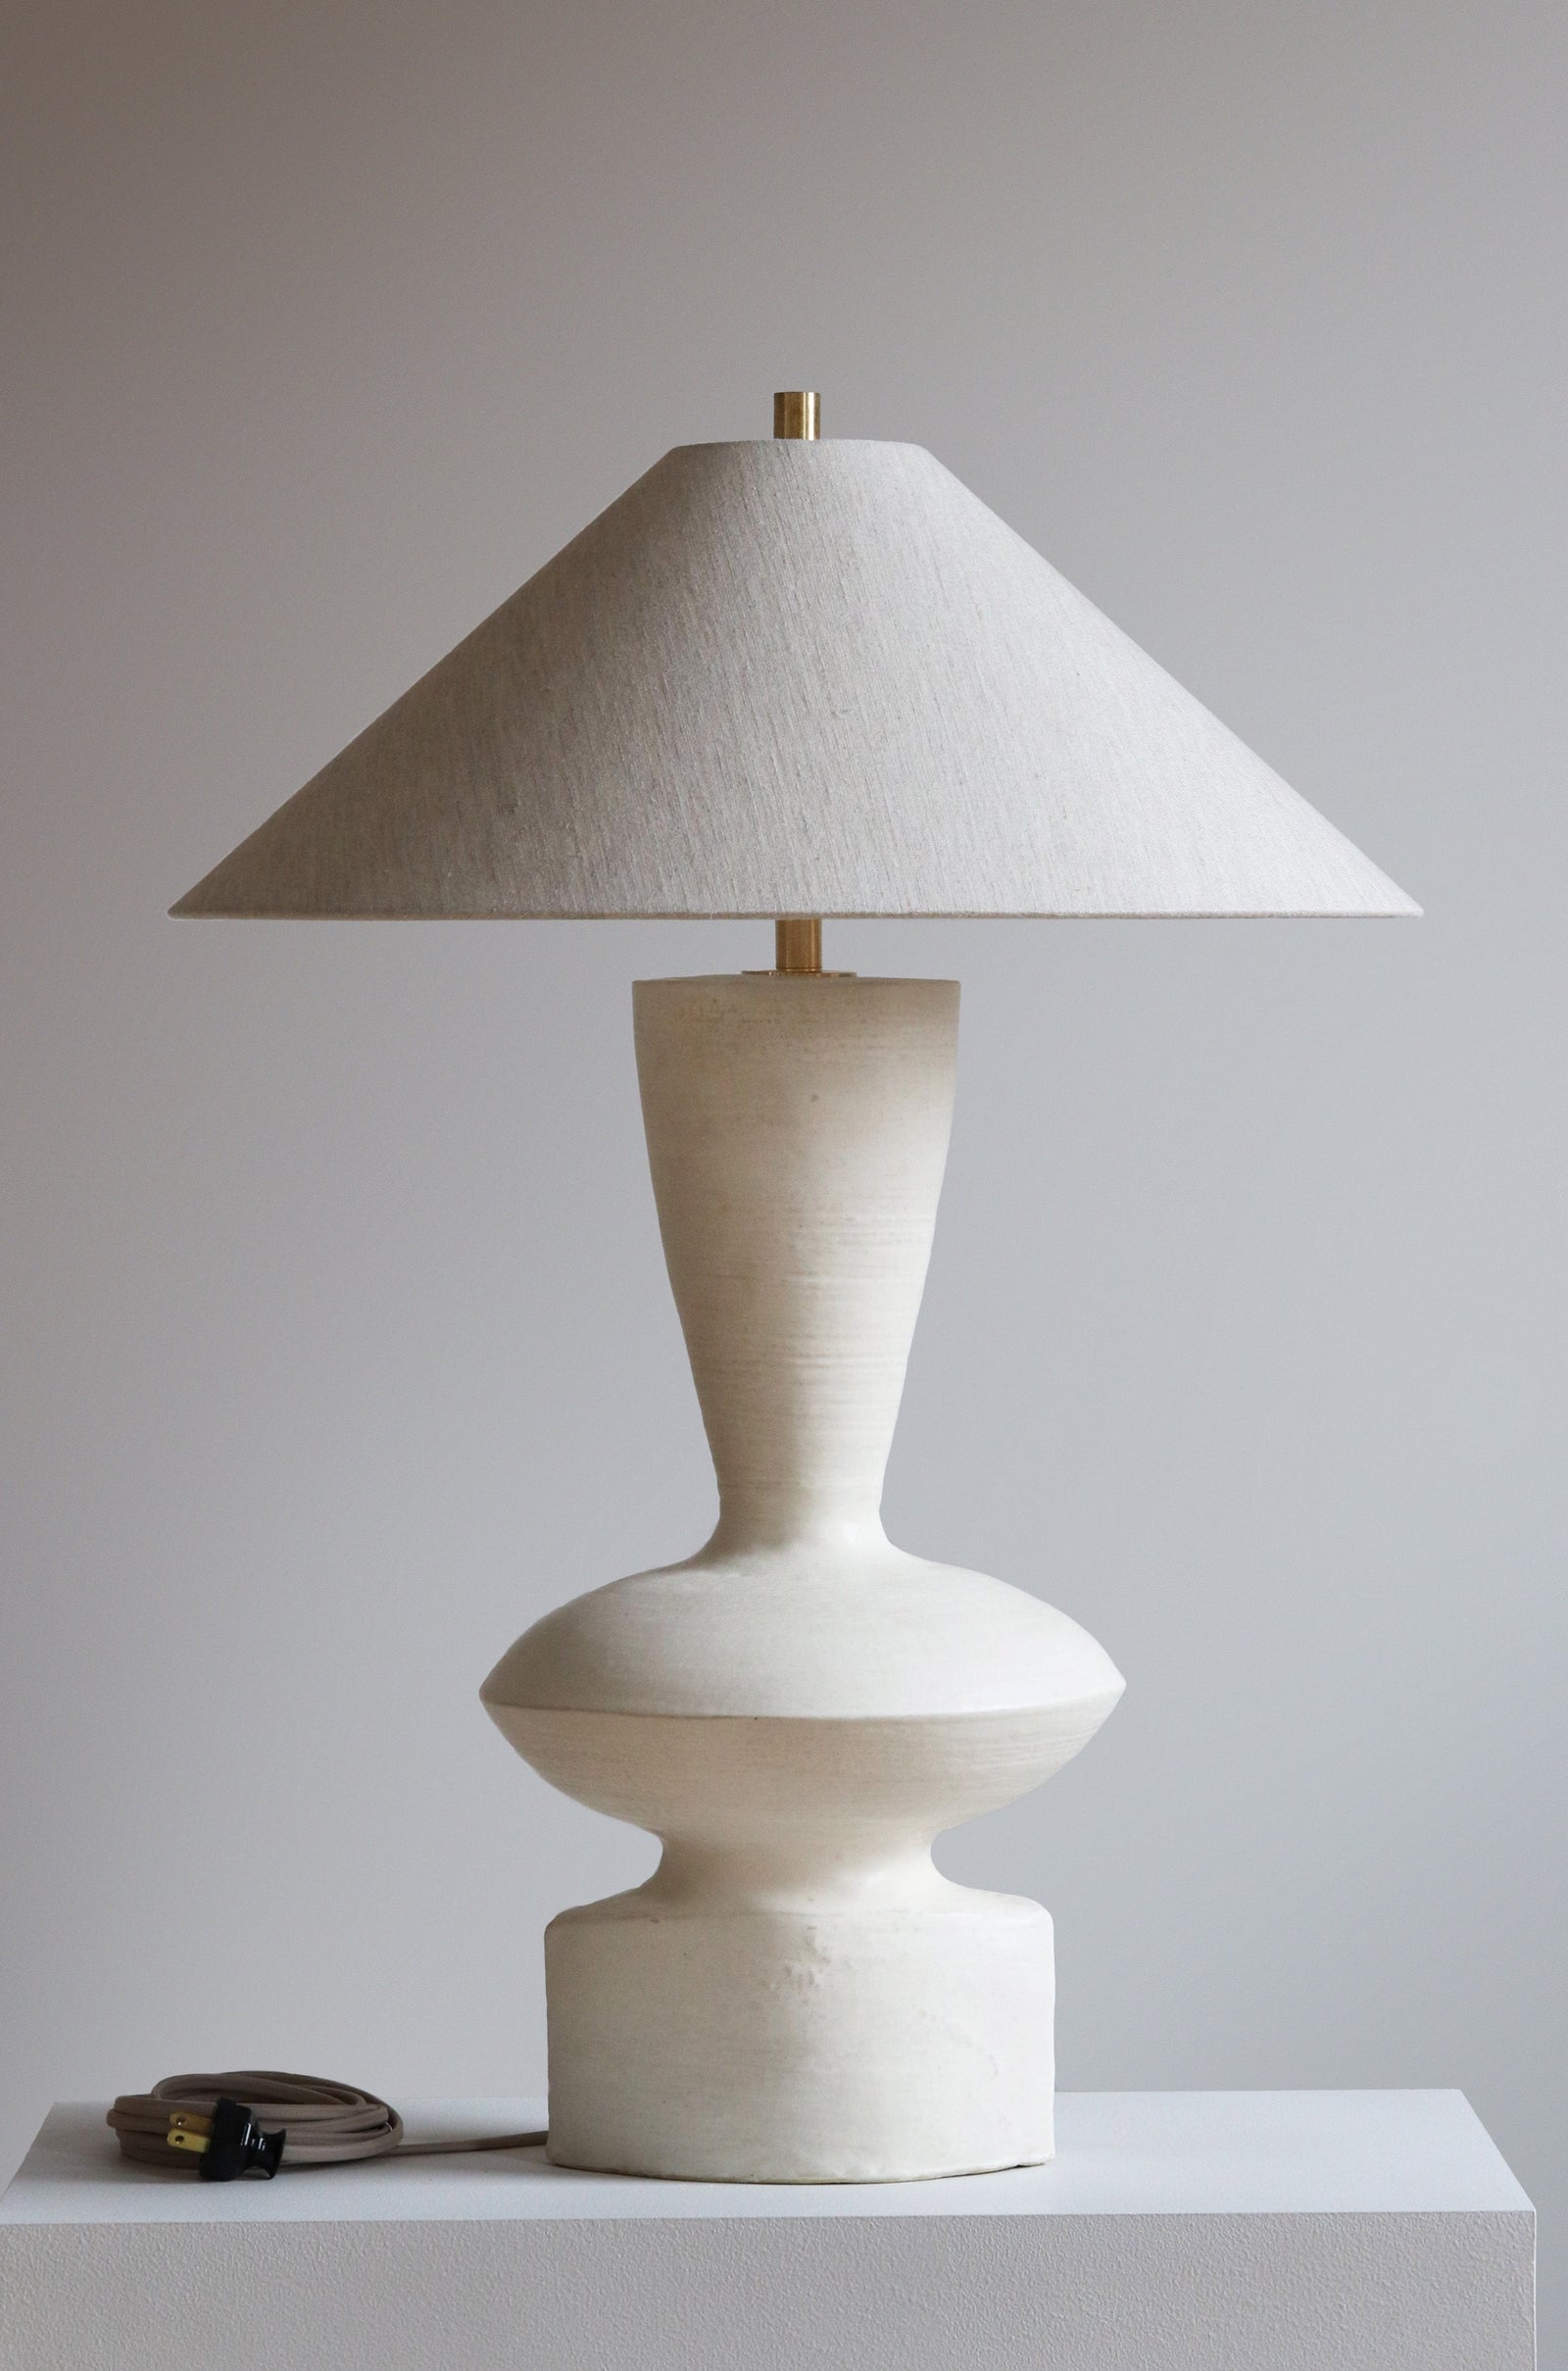 Luna Lamp in Stone with Oatmeal linen shade